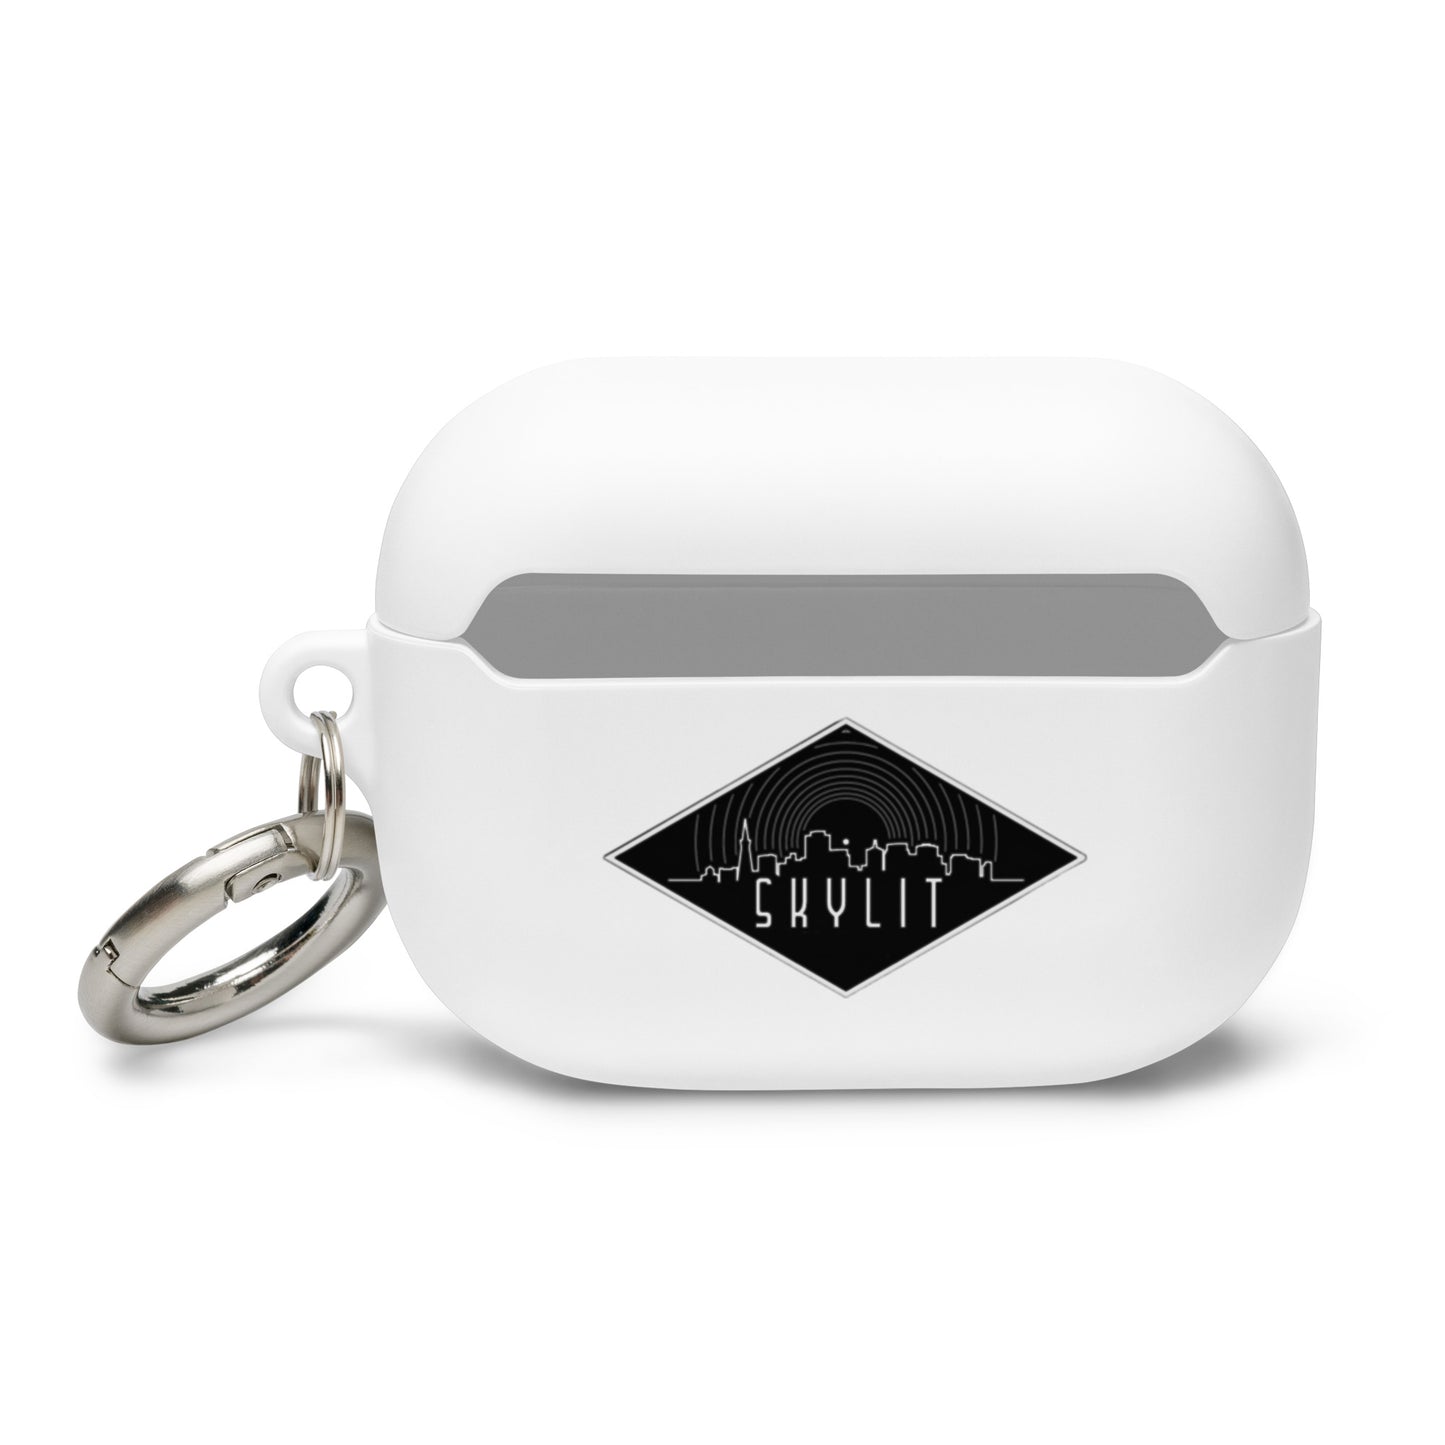 Skylit AirPods case